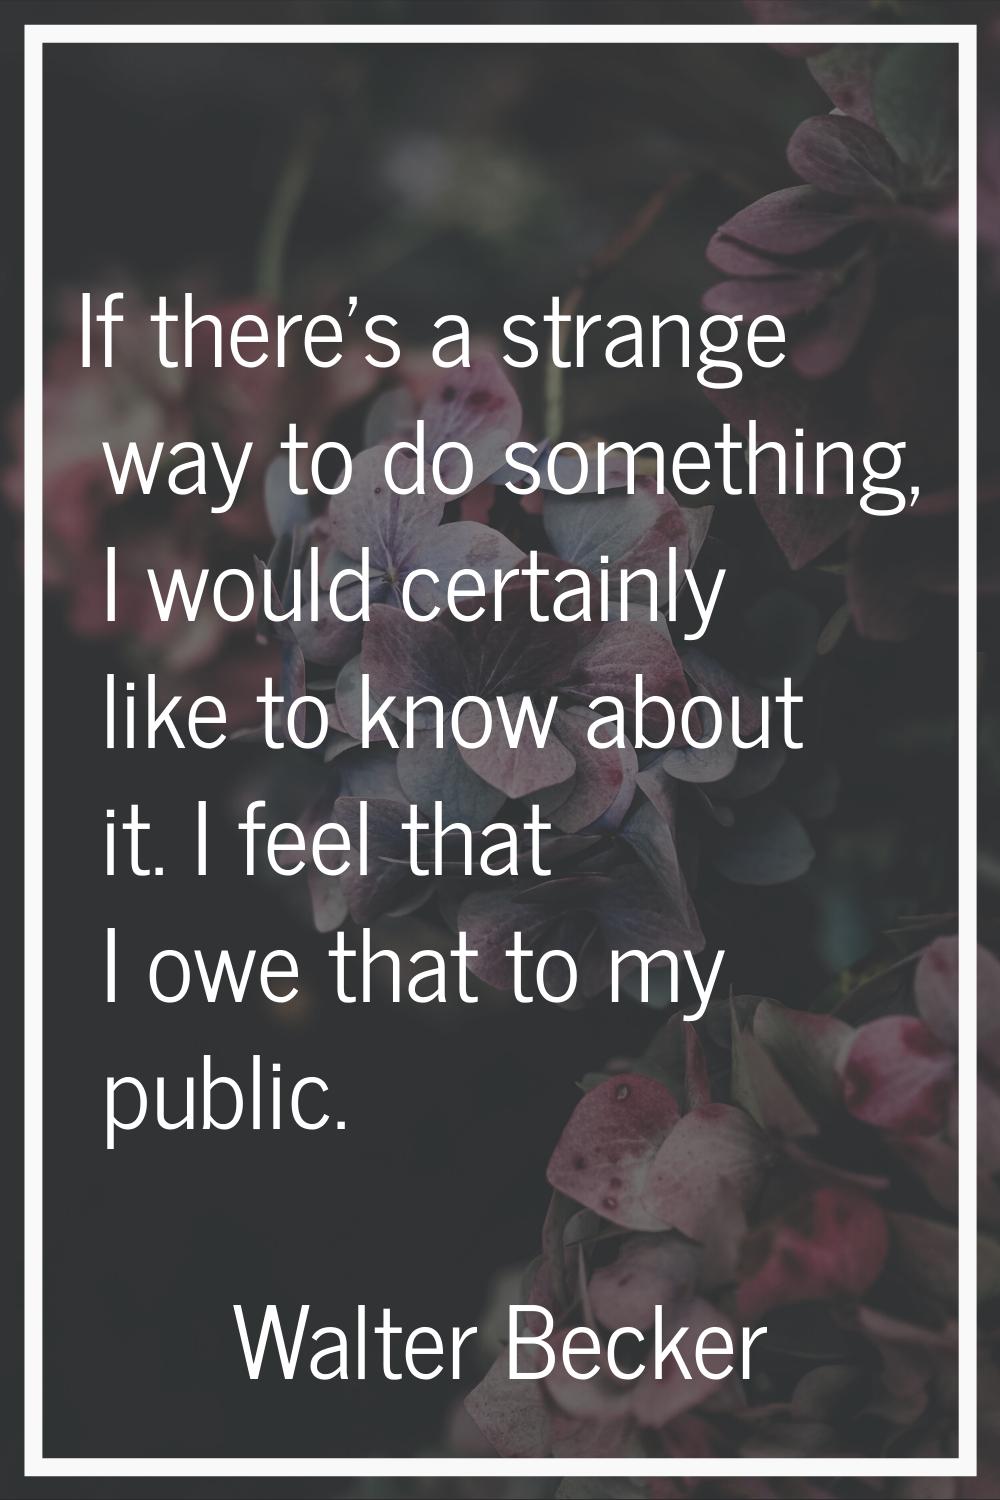 If there's a strange way to do something, I would certainly like to know about it. I feel that I ow